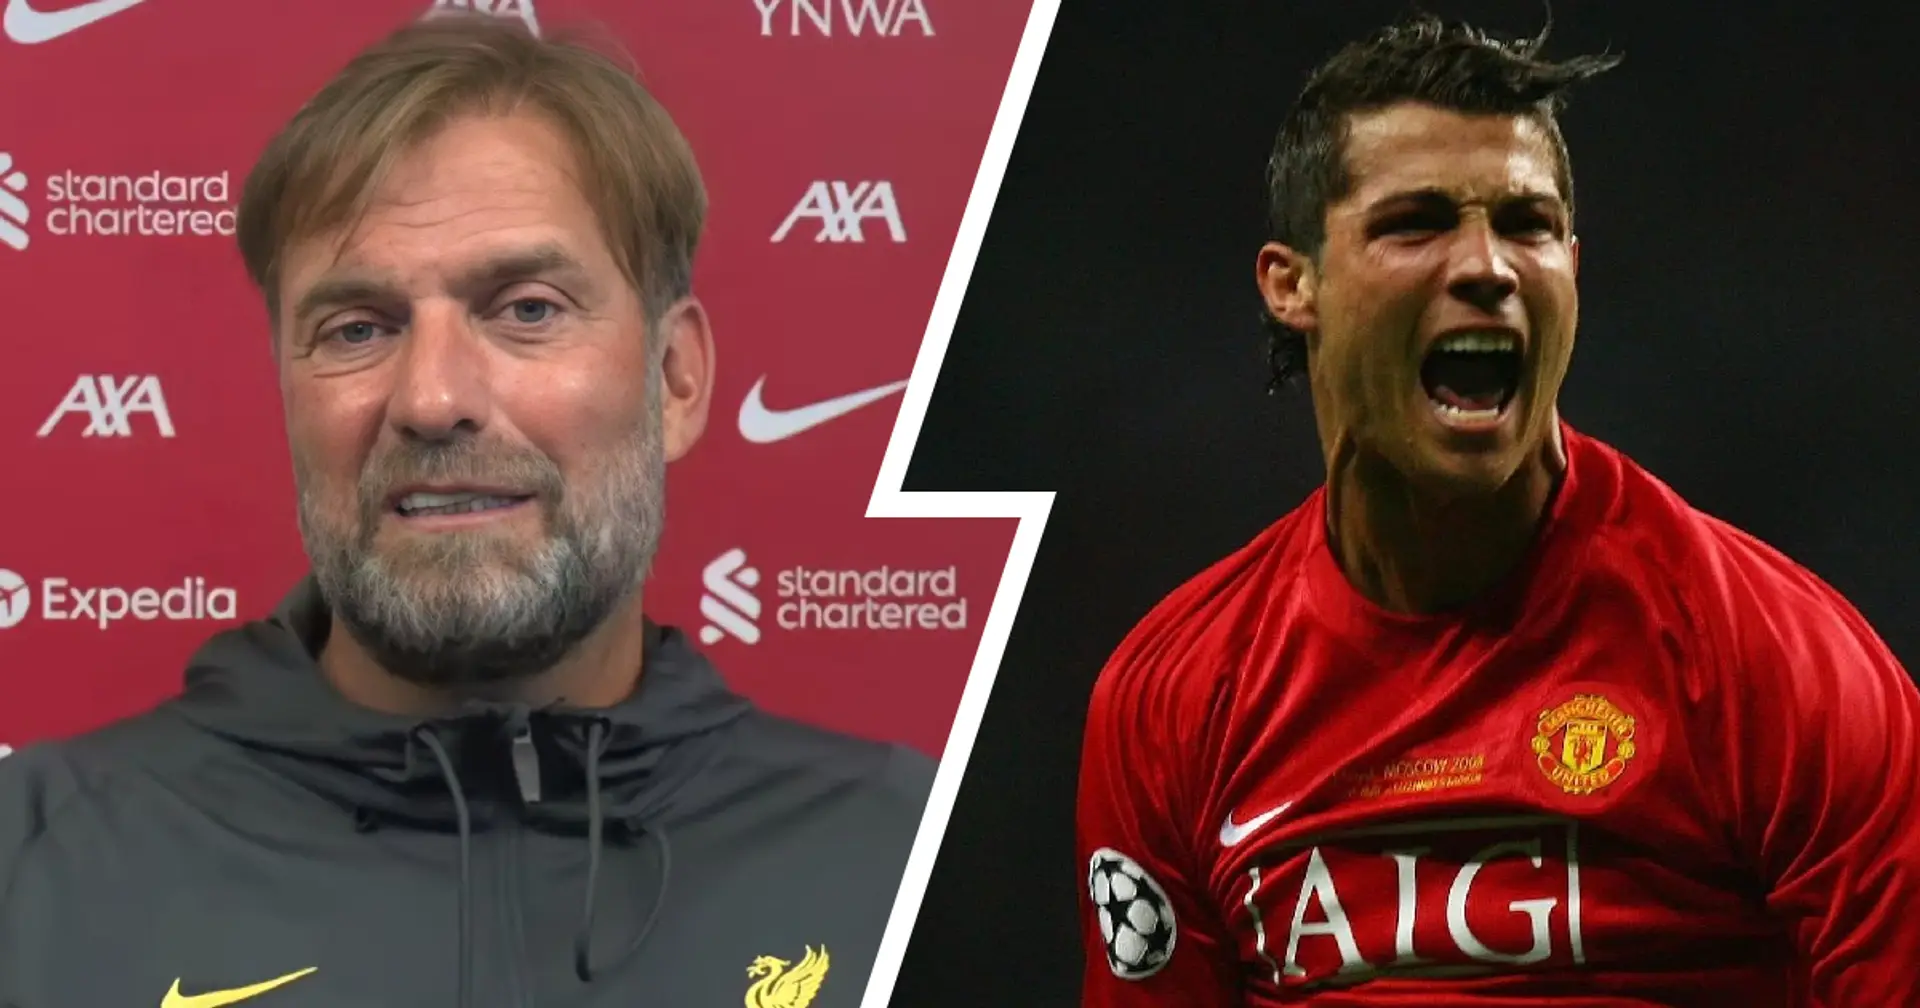 'It's not a business for the future': Jurgen Klopp's salty reaction to Ronaldo joining Man United